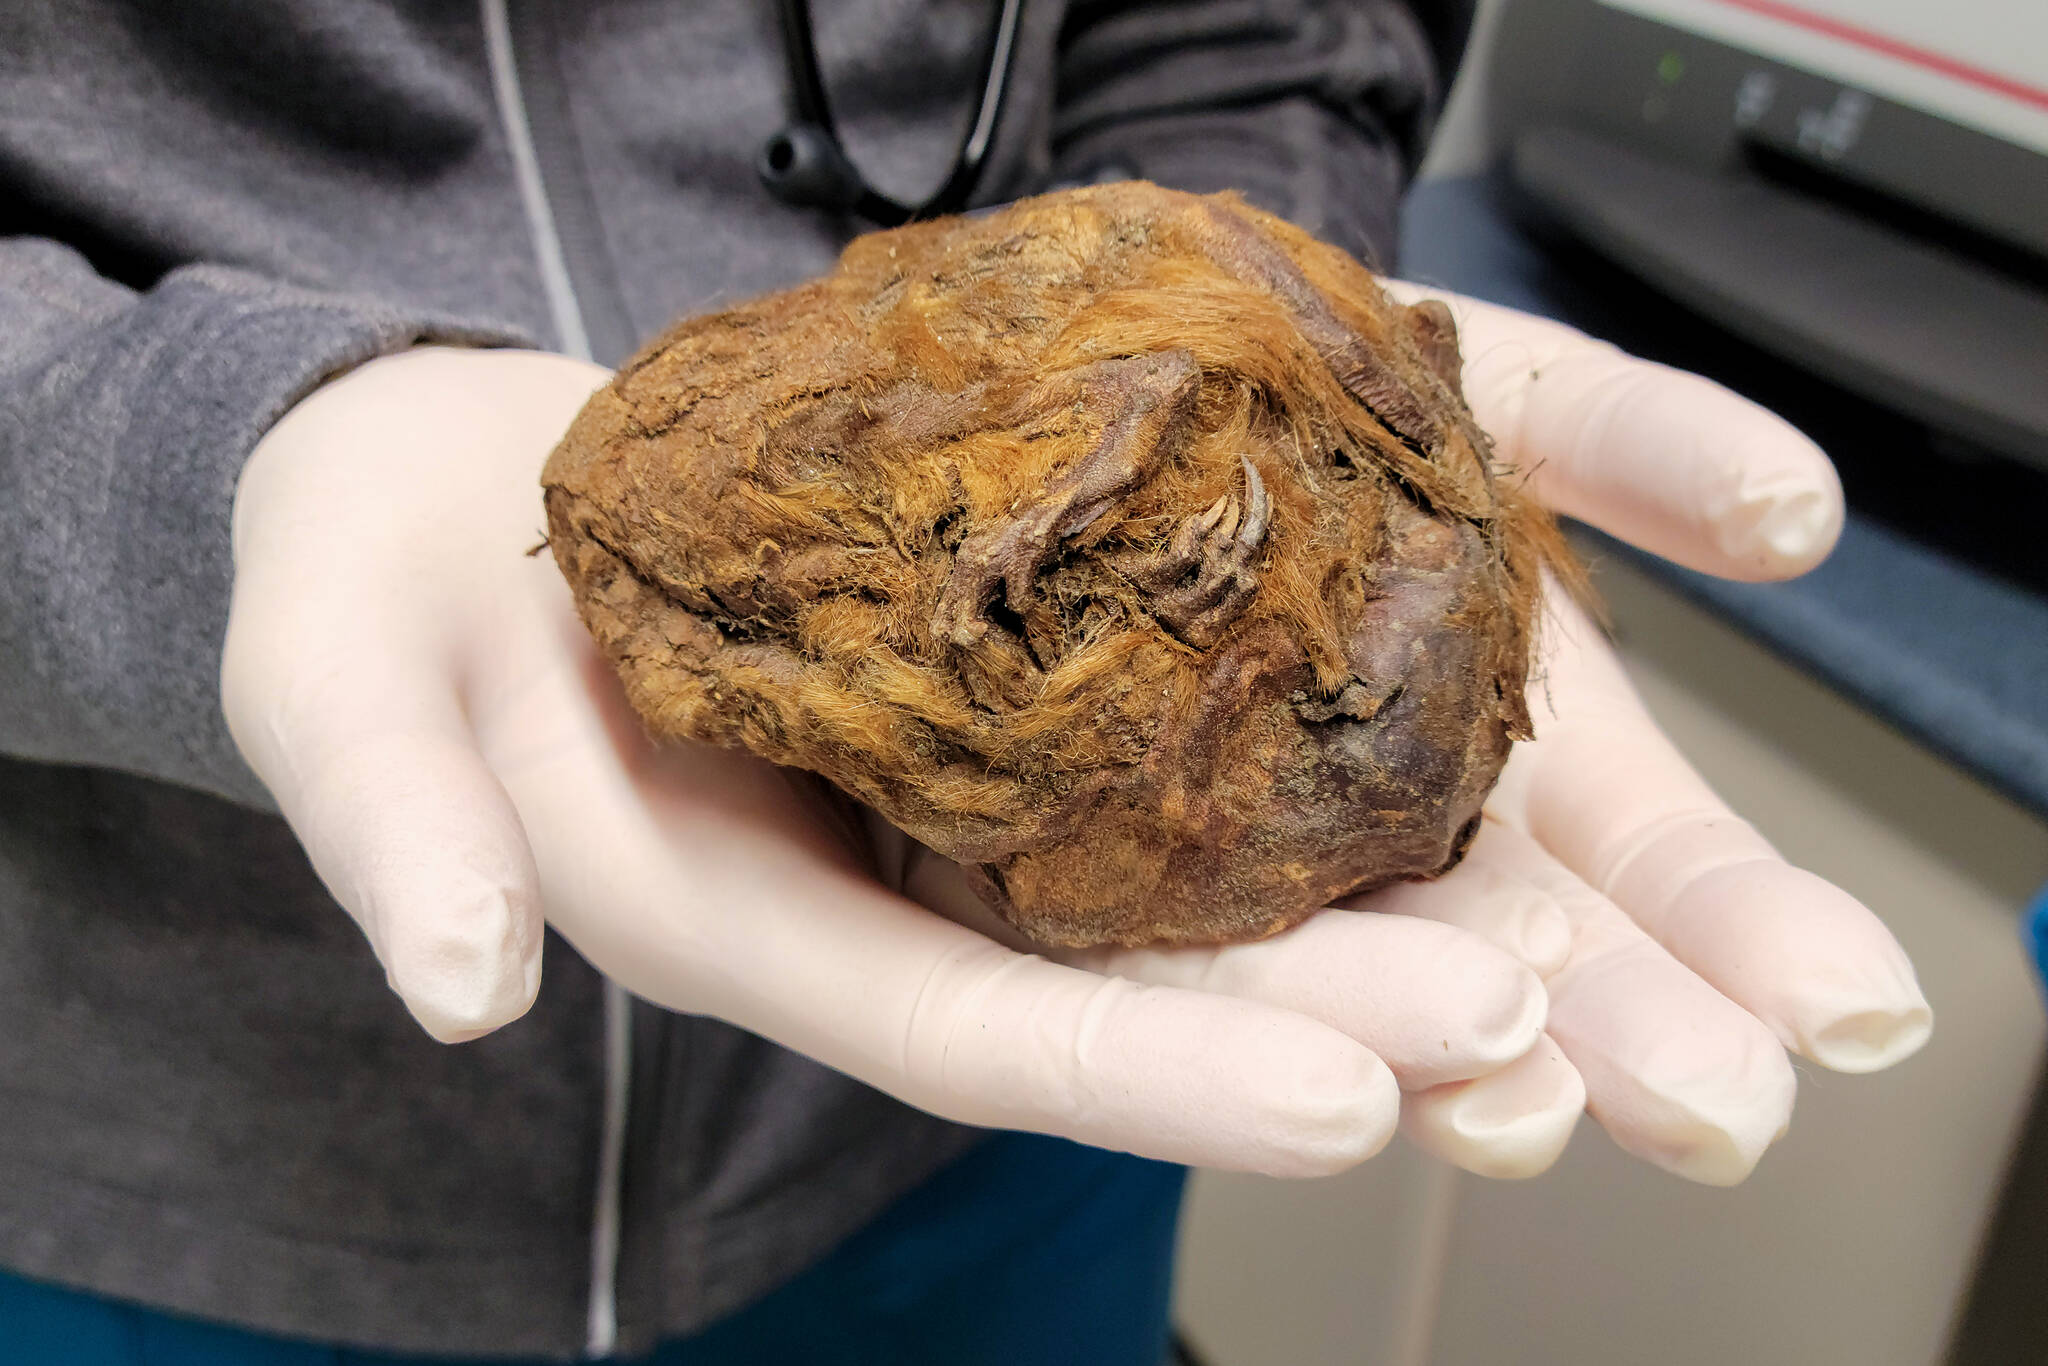 two gloved hands holding a mummified brown squirrel in the shape of a perfect sphere